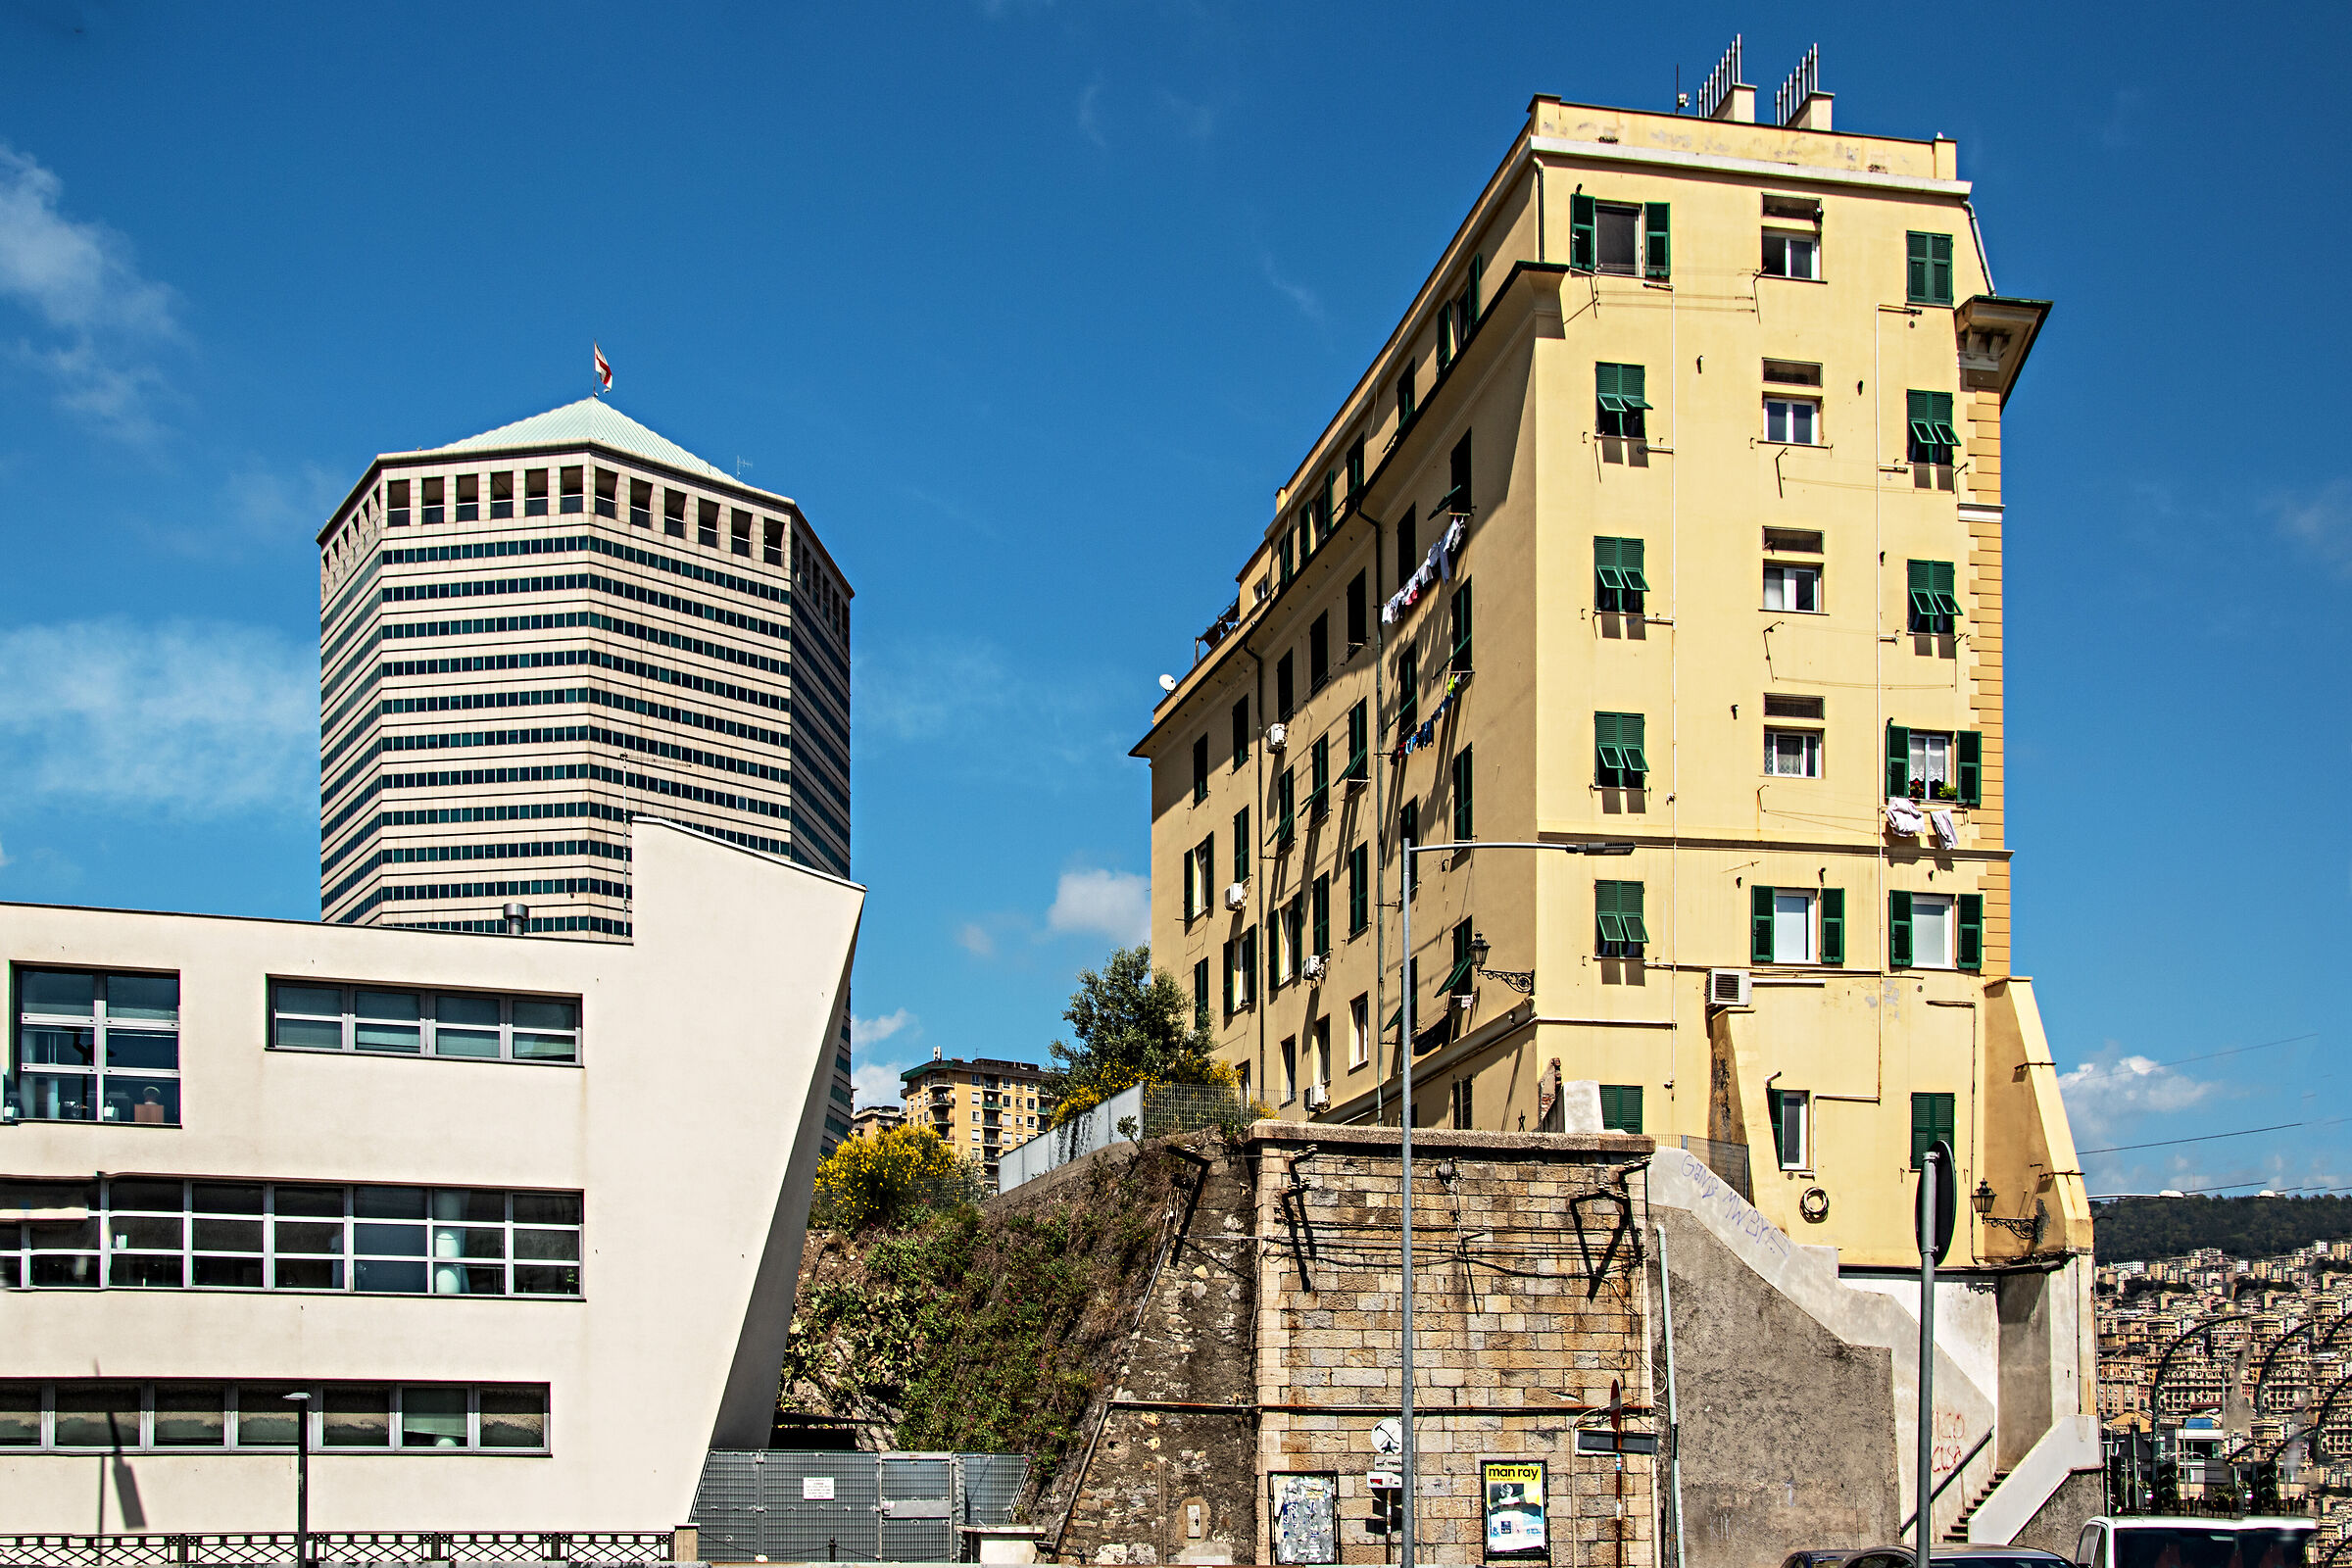 Genoa between old and new...